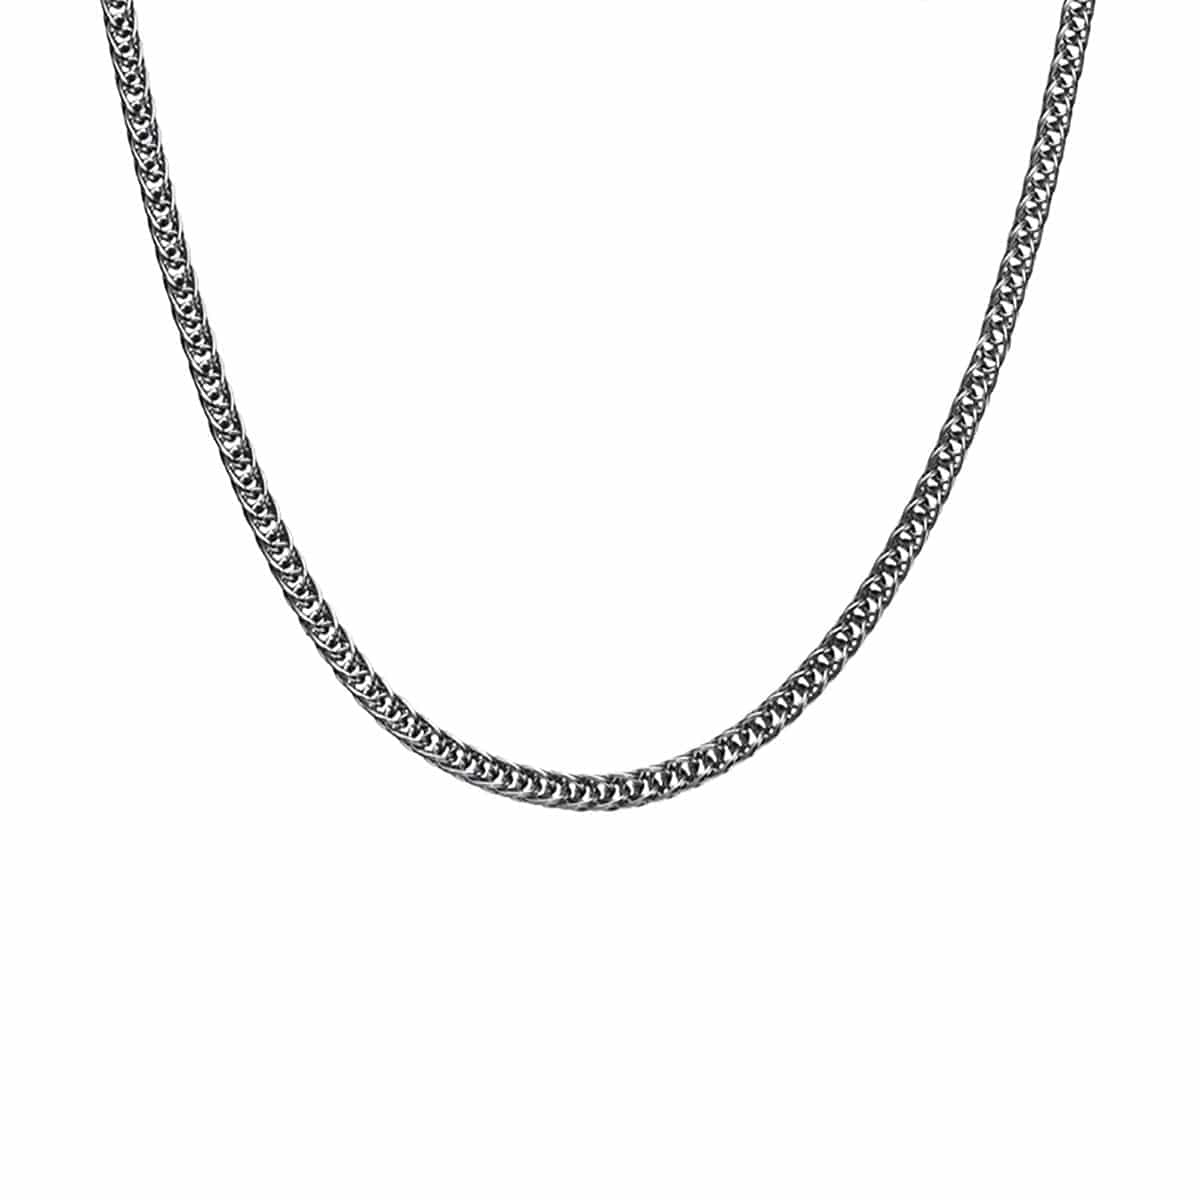 INOX JEWELRY Chains Silver Tone Stainless Steel Polished 4 mm Round Wheat Chain